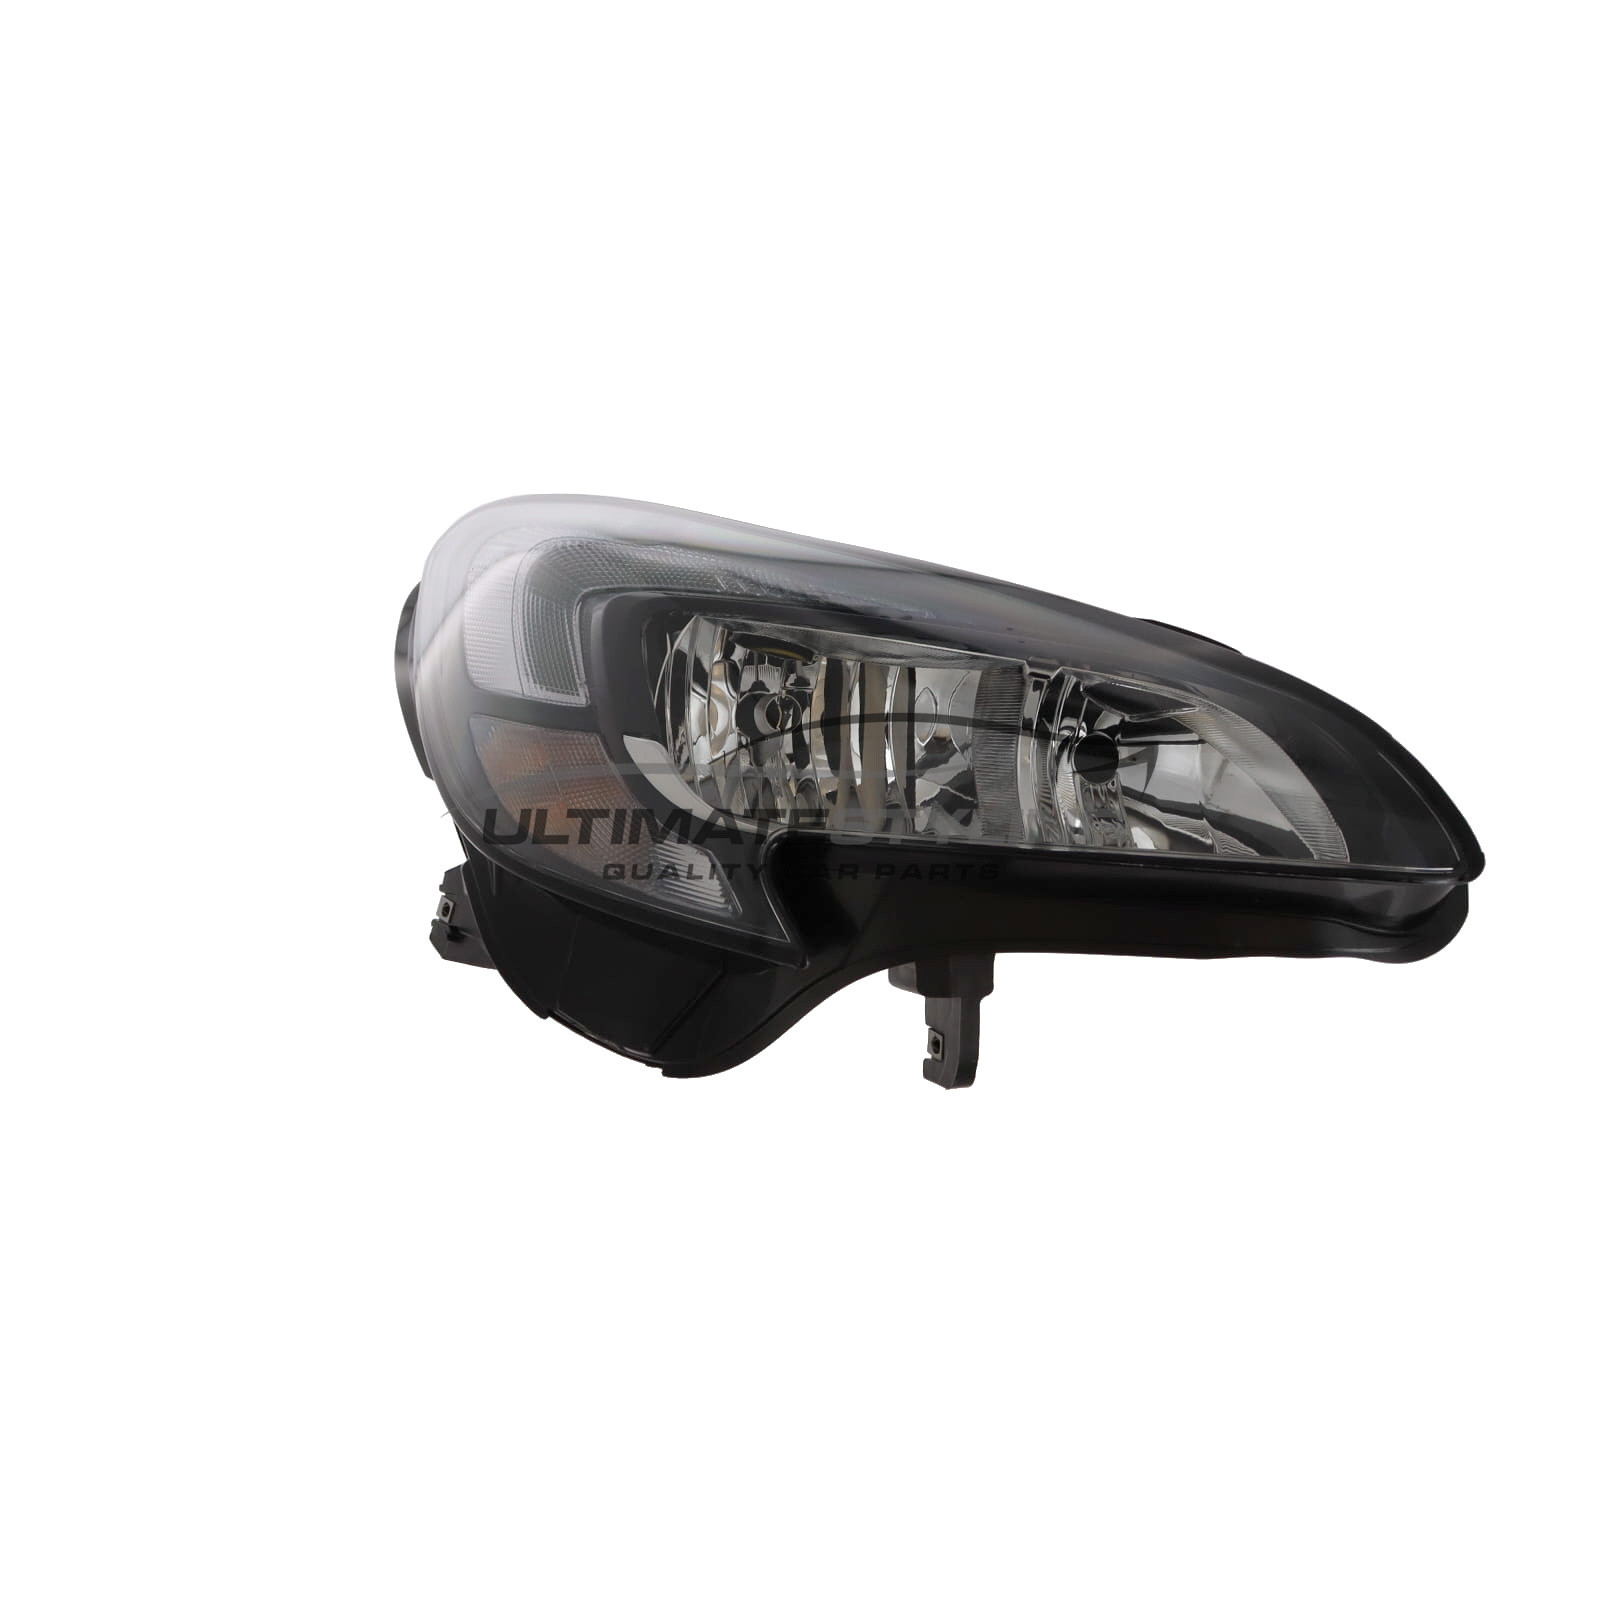 Vauxhall Corsa 2014-2020 Halogen With LED Daytime Running Lamp, Electric With Motor, Chrome Headlight / Headlamp with Black Surround Drivers Side (RH)